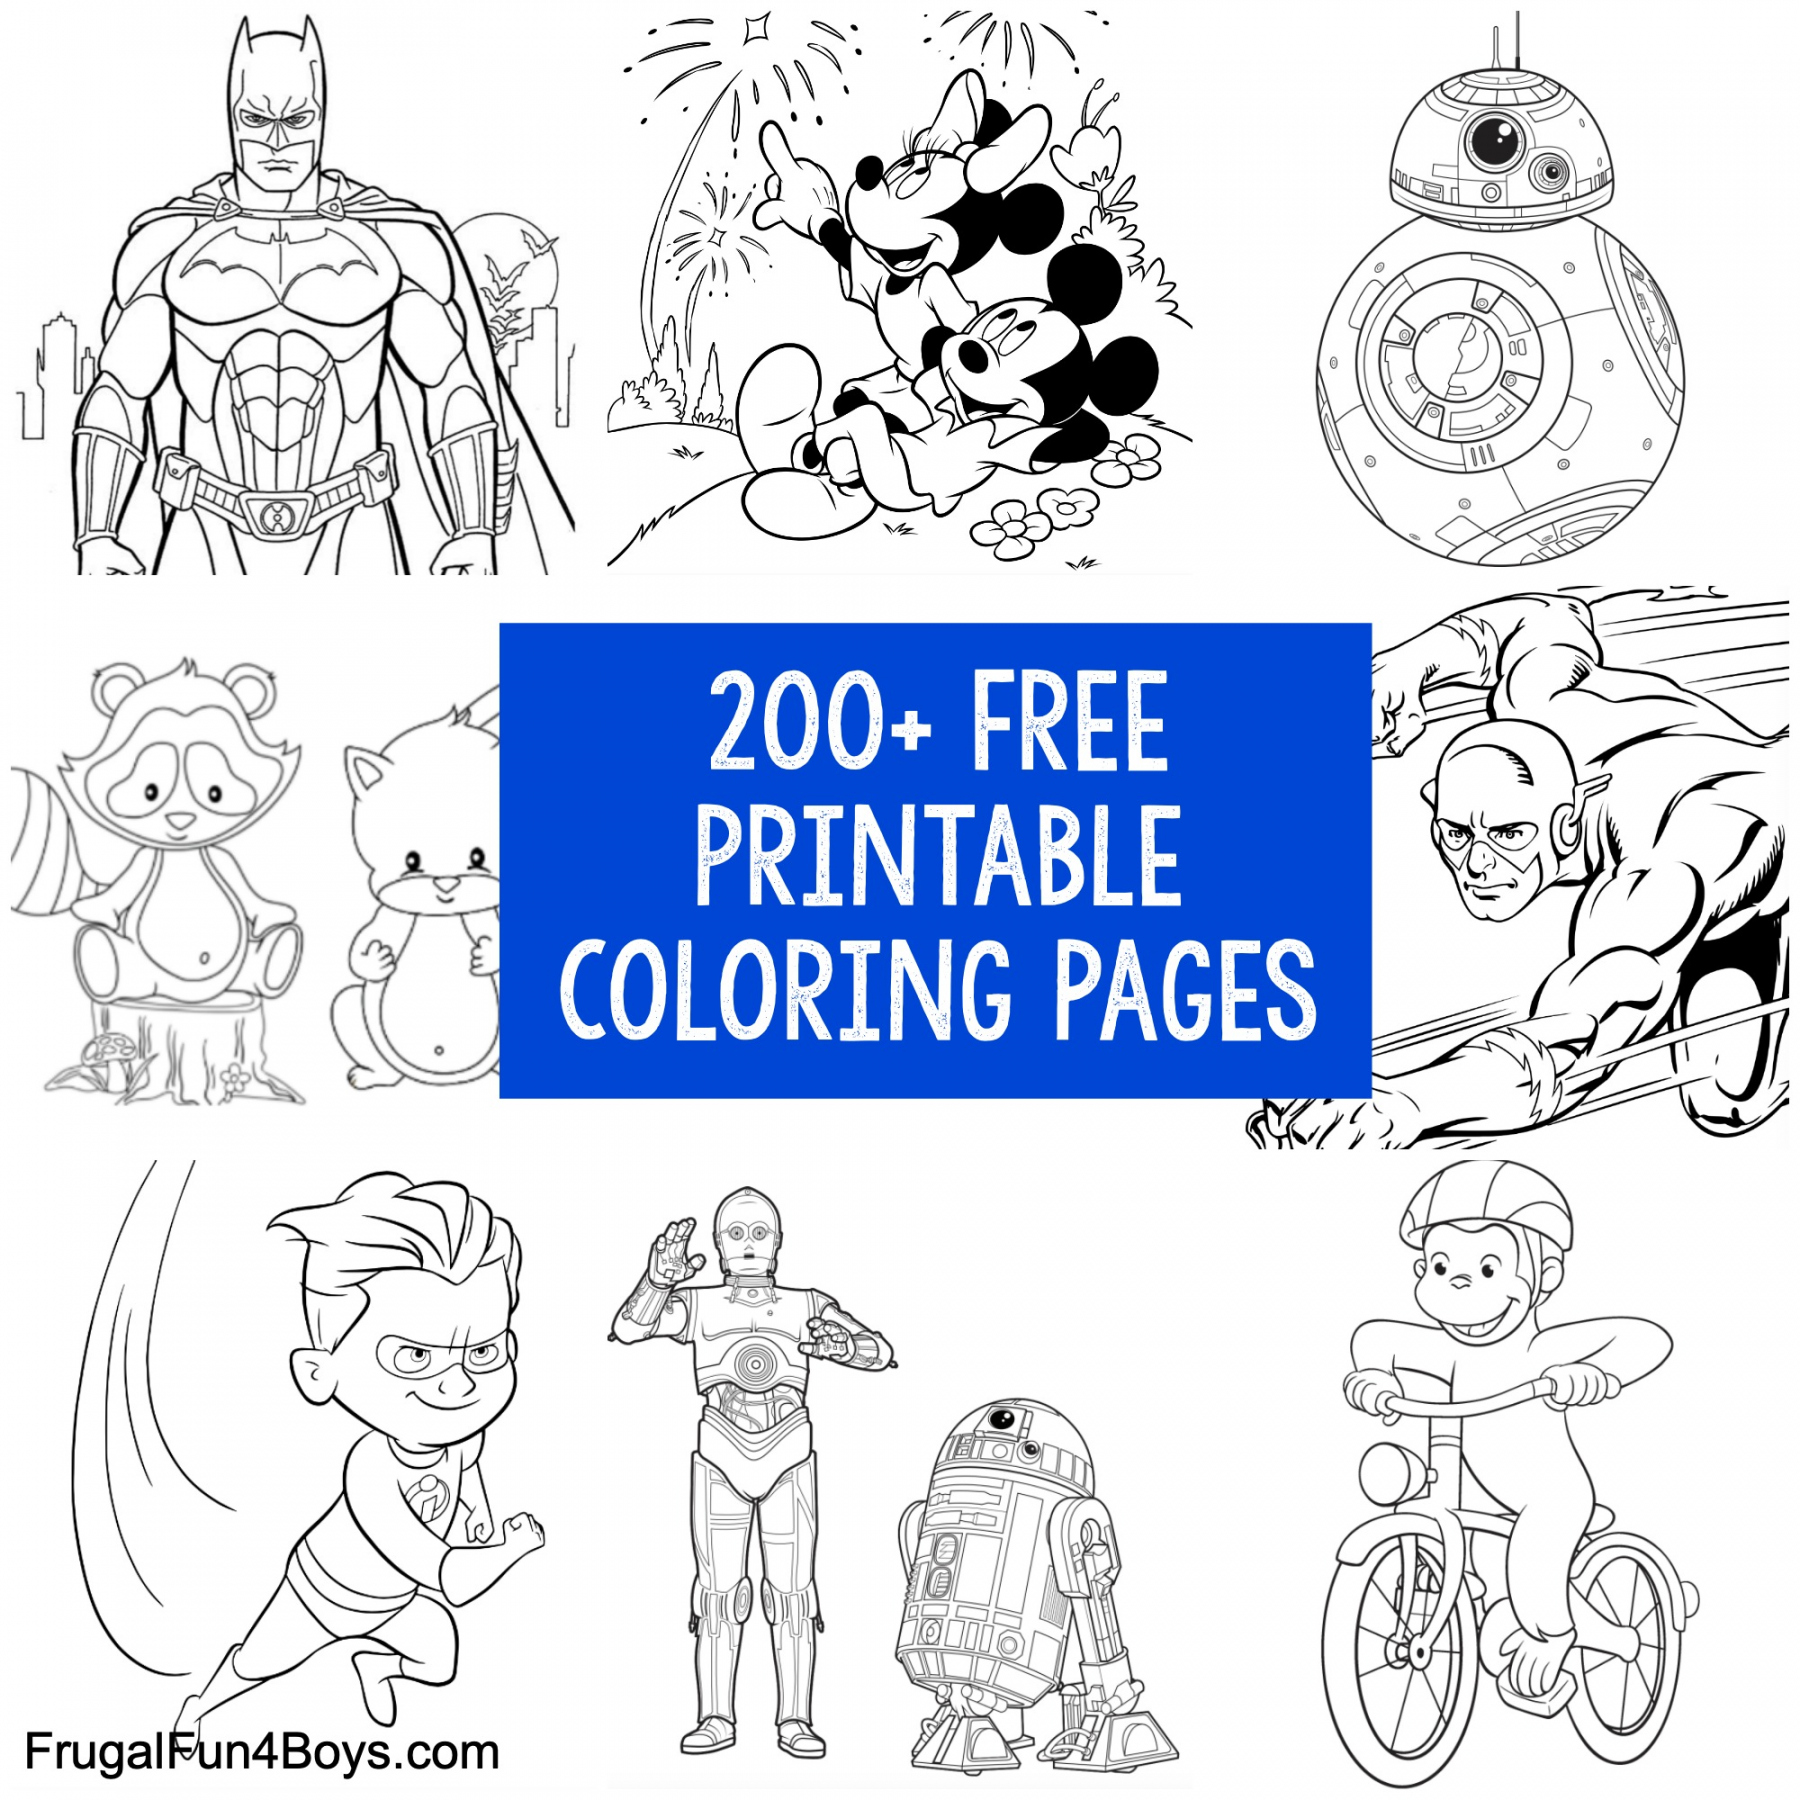 + Printable Coloring Pages for Kids - Frugal Fun For Boys and Girls - FREE Printables - Free Printable Coloring Pages For Boys